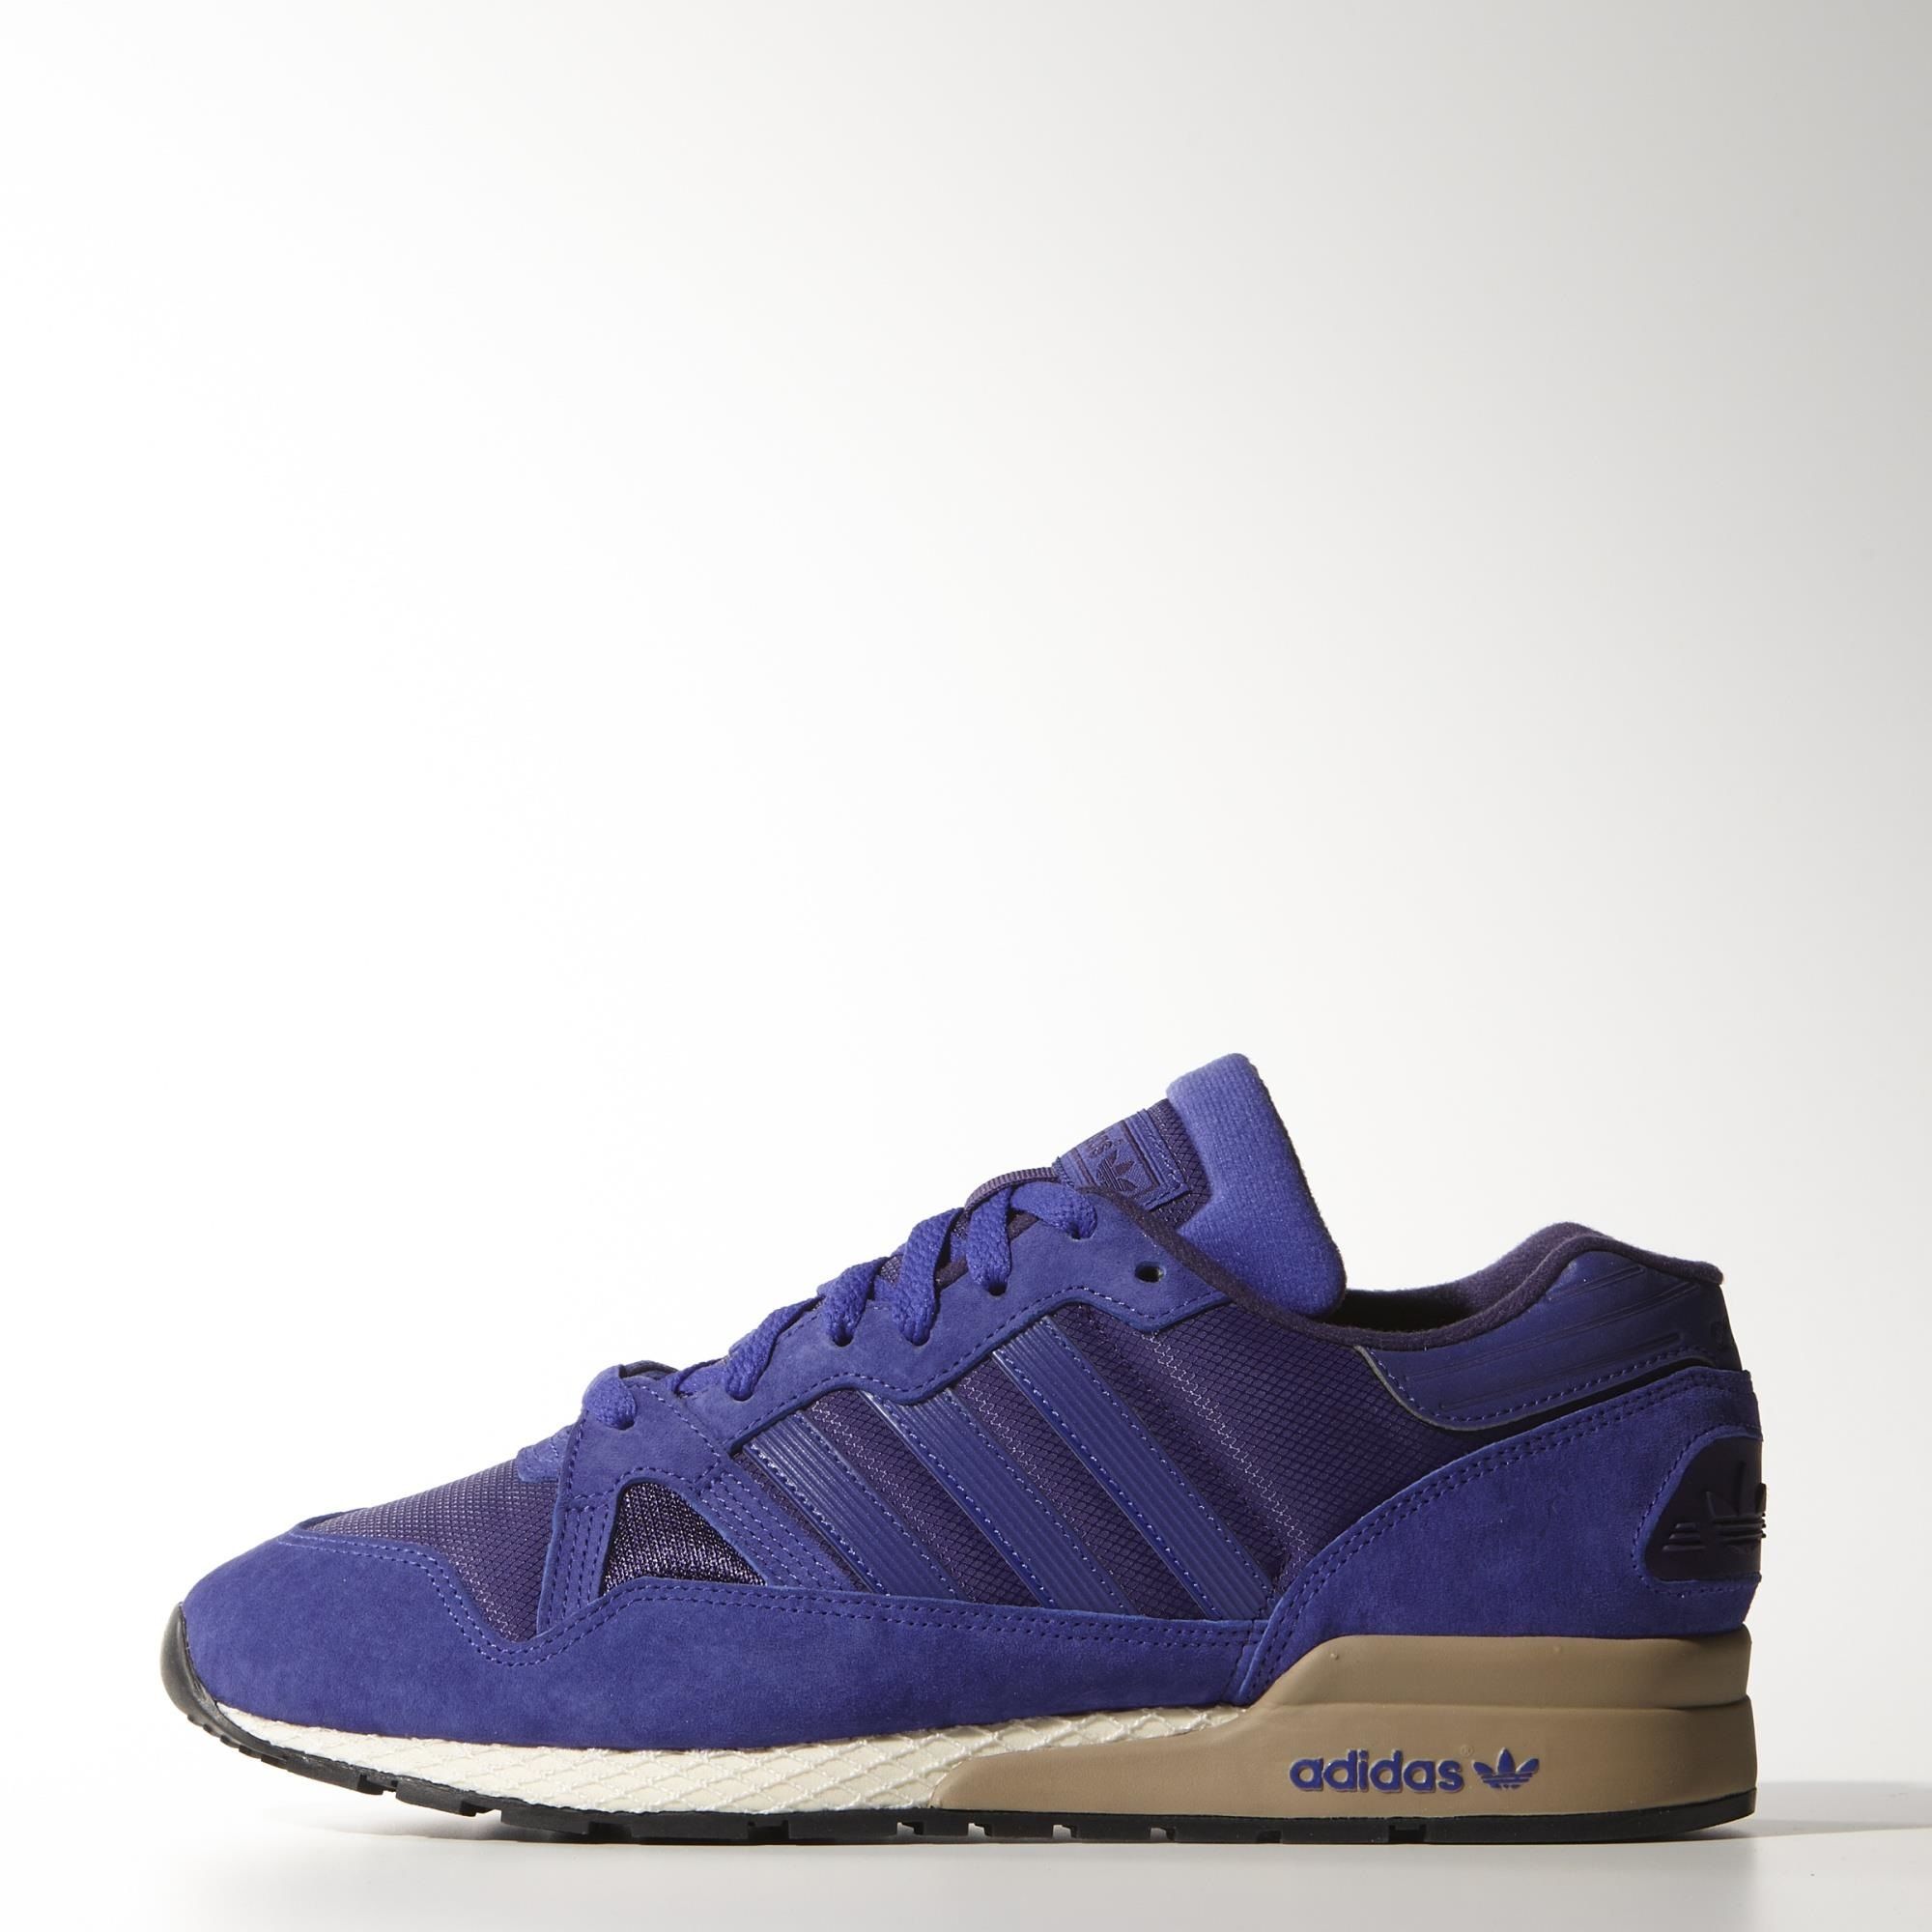 adidas zx 710 homme